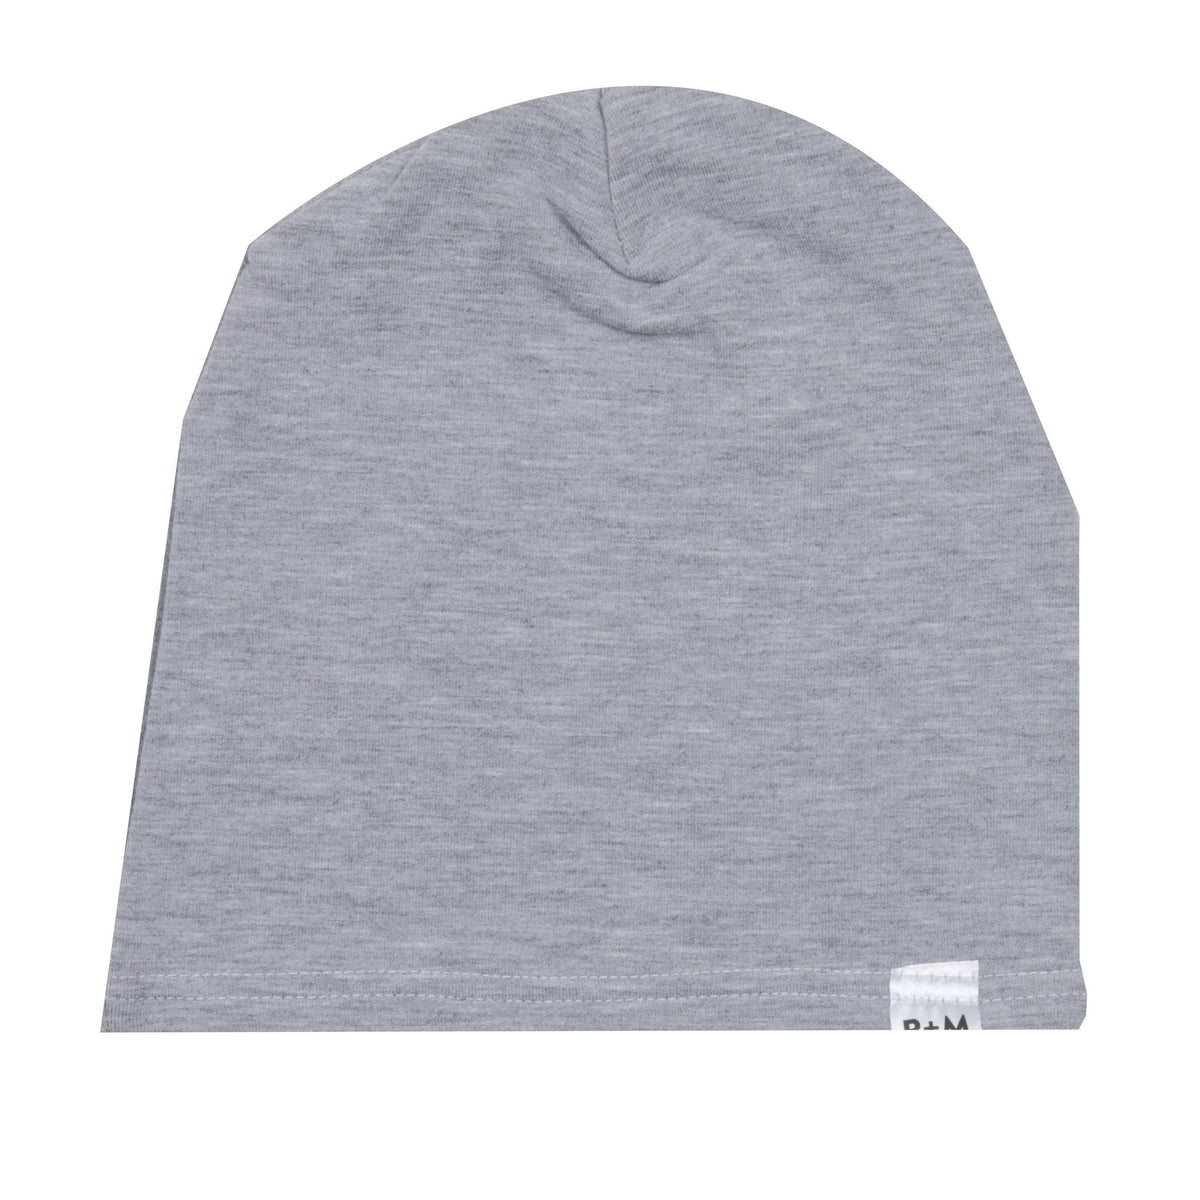 Portage and Main | Children's Beanie Grey Hat - All Things Dylan